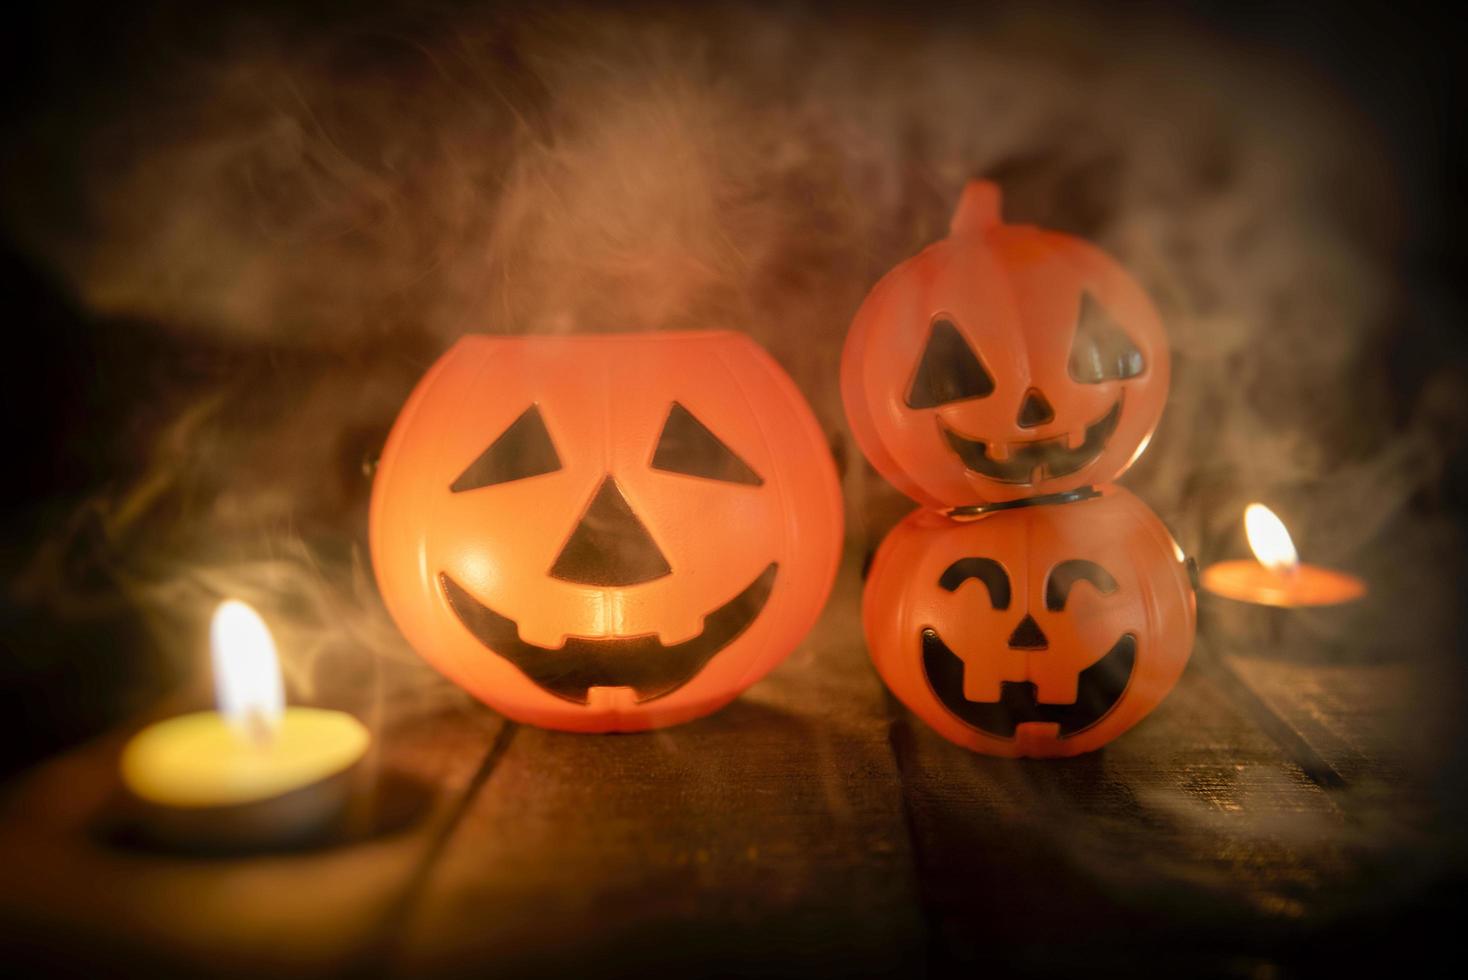 Halloween pumpkin lantern candle light on wooden with smoke - head jack o lantern funny faces spooky holiday decorate on halloween background photo